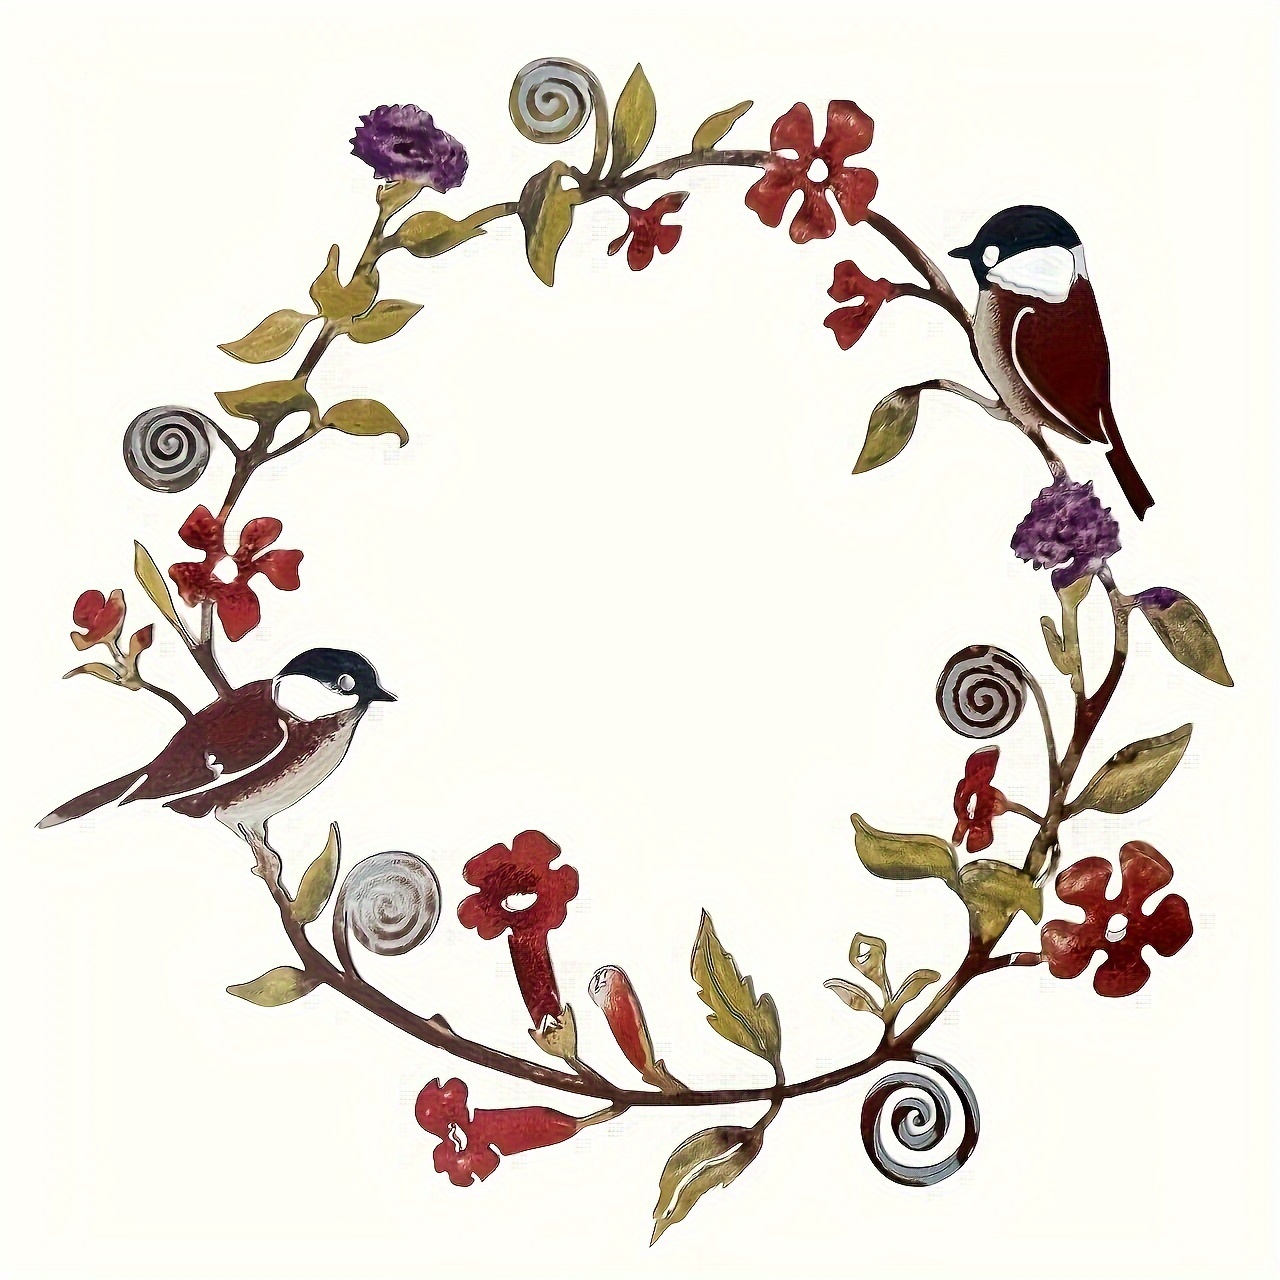 

1-pack Decorative Metal Bird Wreath Wall Art, Garden Floral Wreath With Perched Birds, Home Decor Hanging Sculpture For Living Room, Bedroom, Holiday Decorations